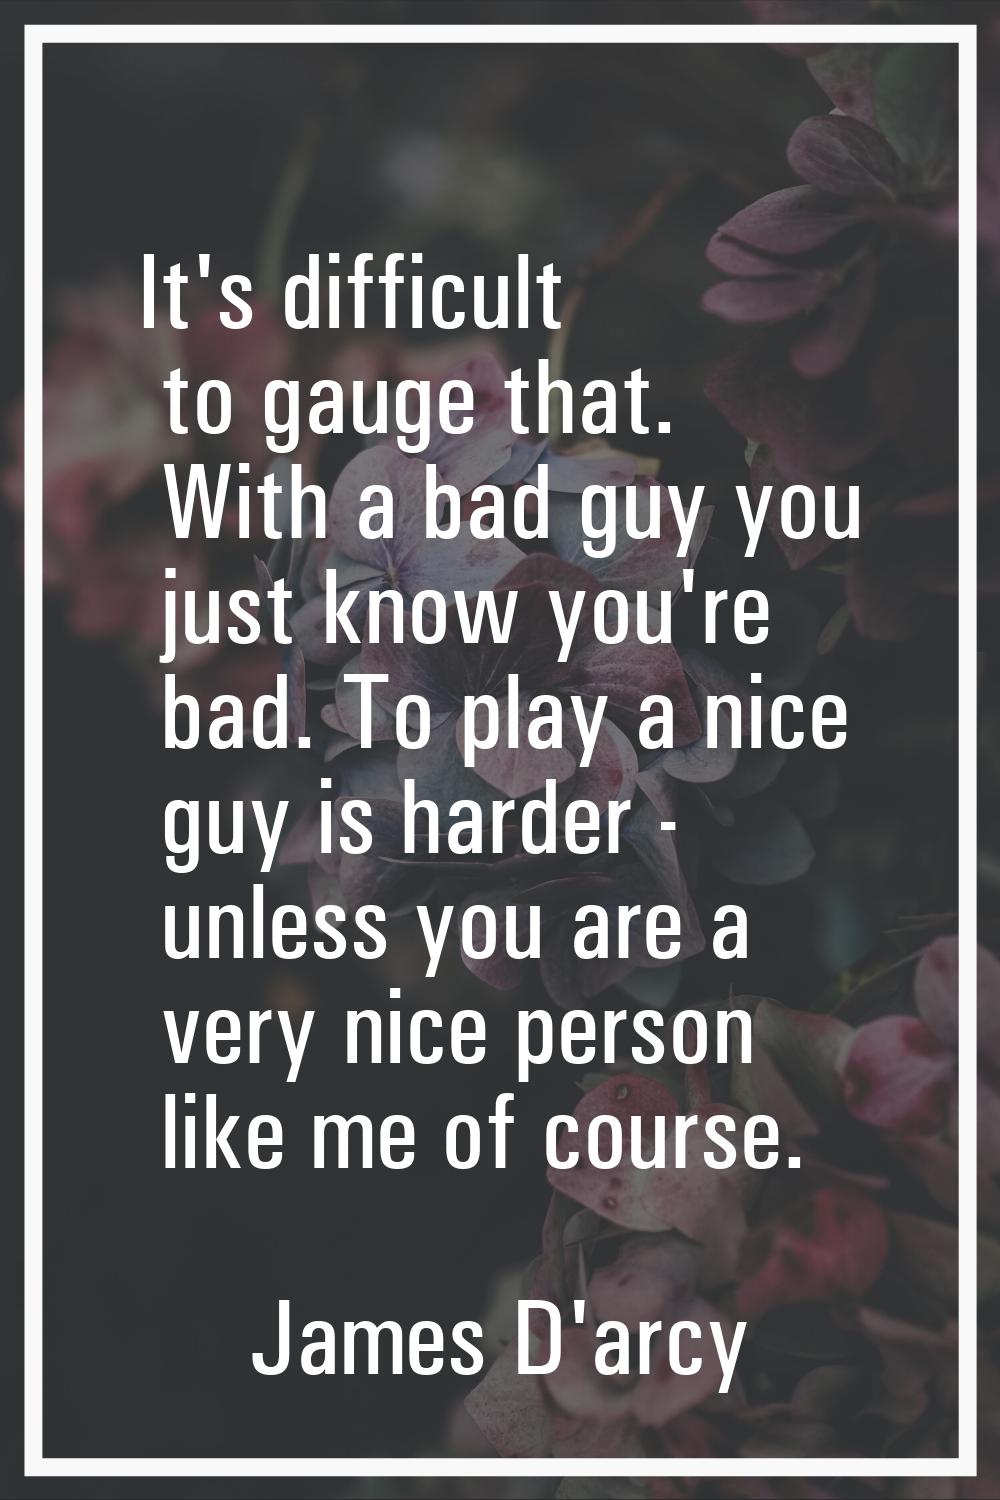 It's difficult to gauge that. With a bad guy you just know you're bad. To play a nice guy is harder